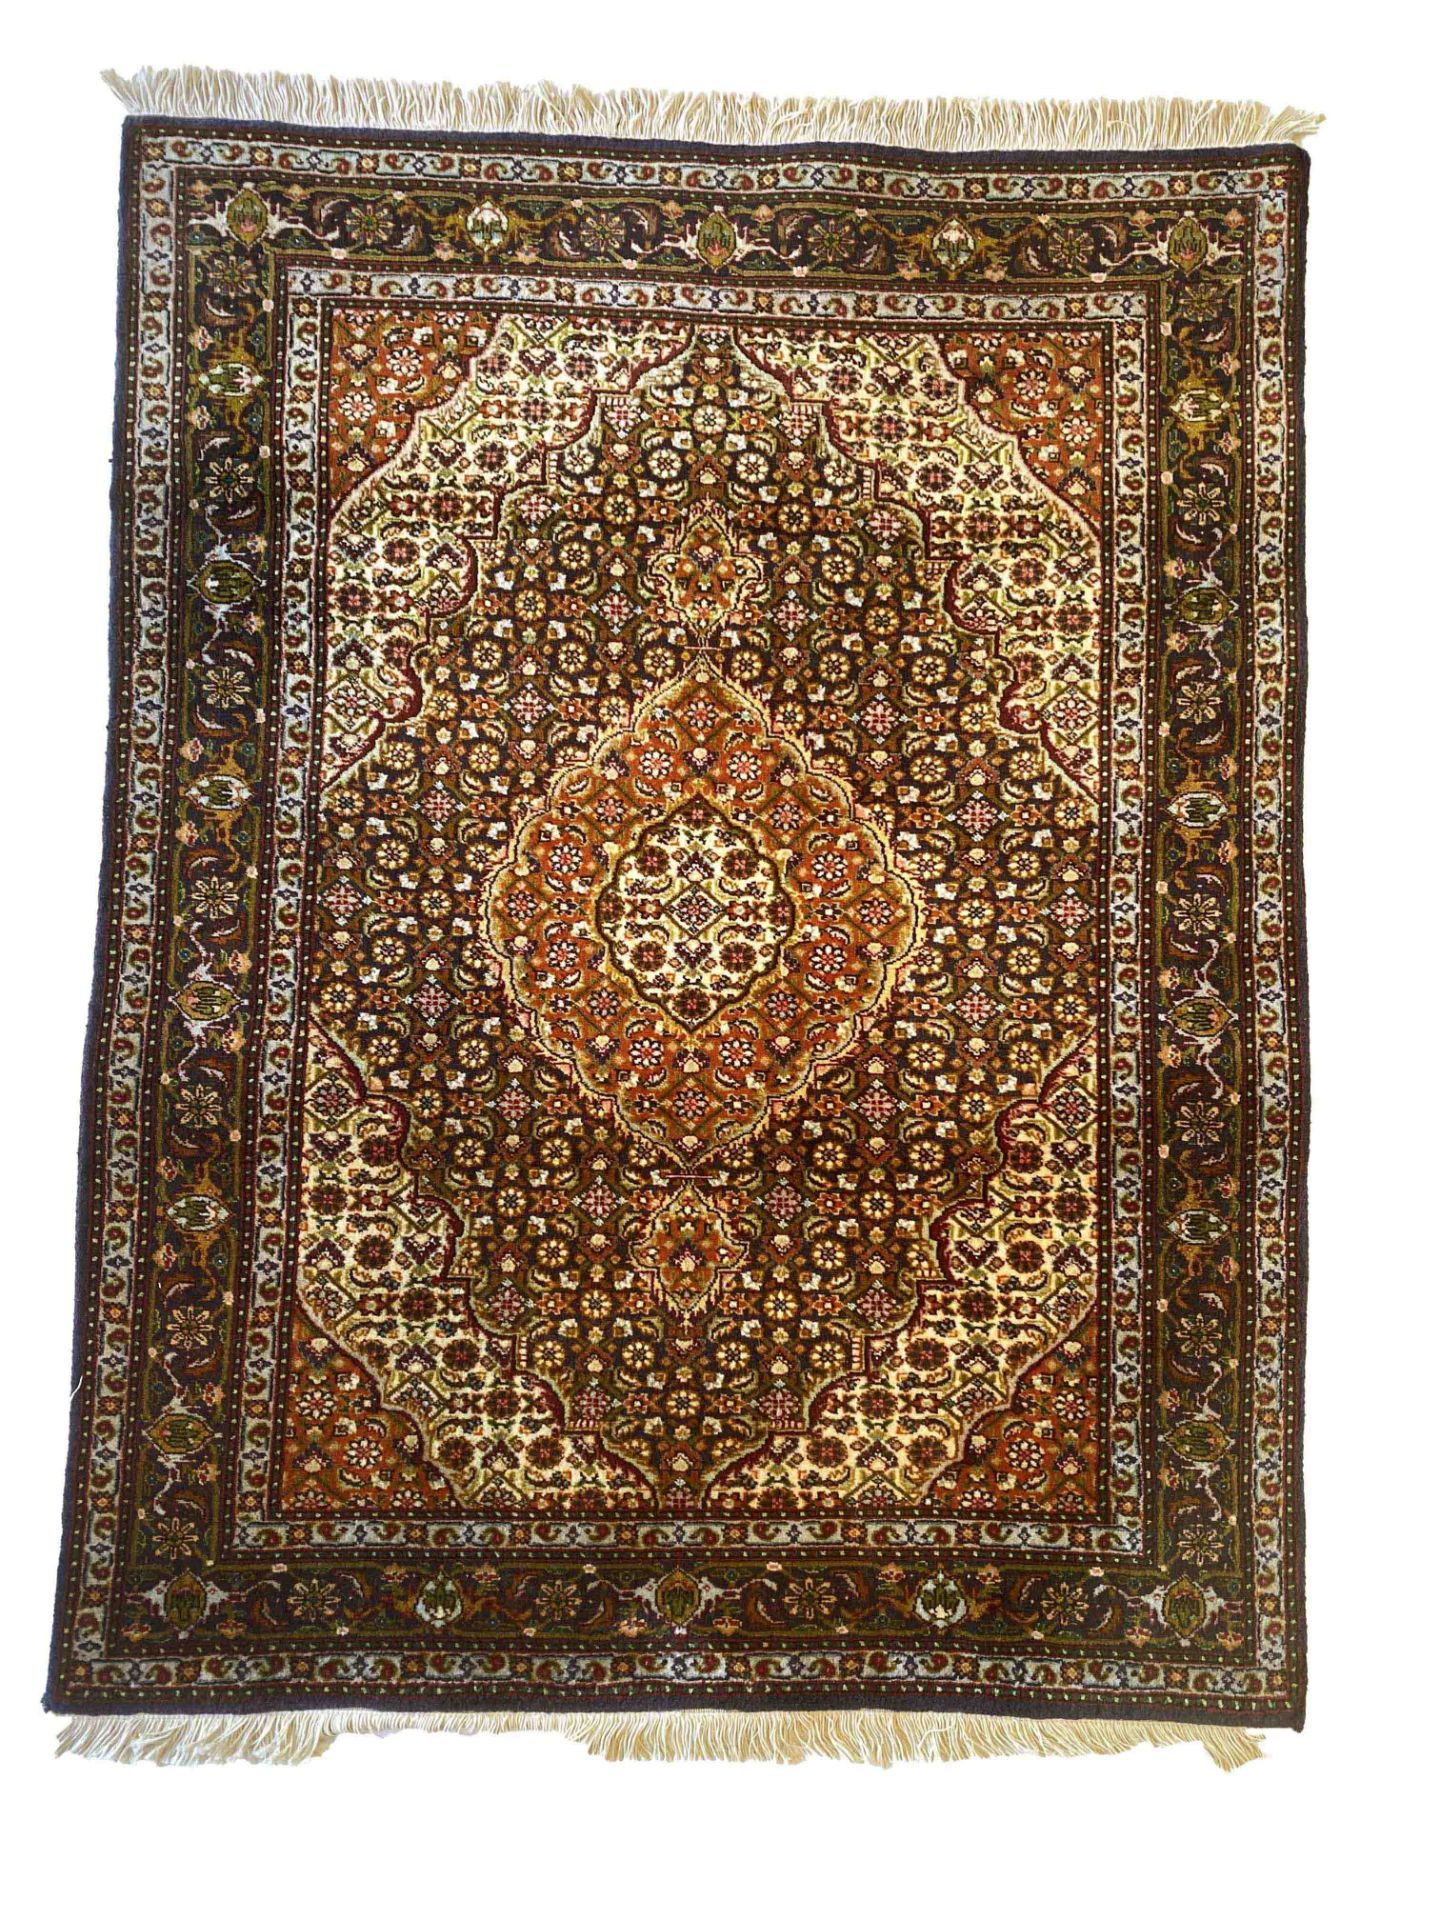 Carpet, Bidjar, good condition, 145 x 103 cm - The carpet can only be viewed and collected at